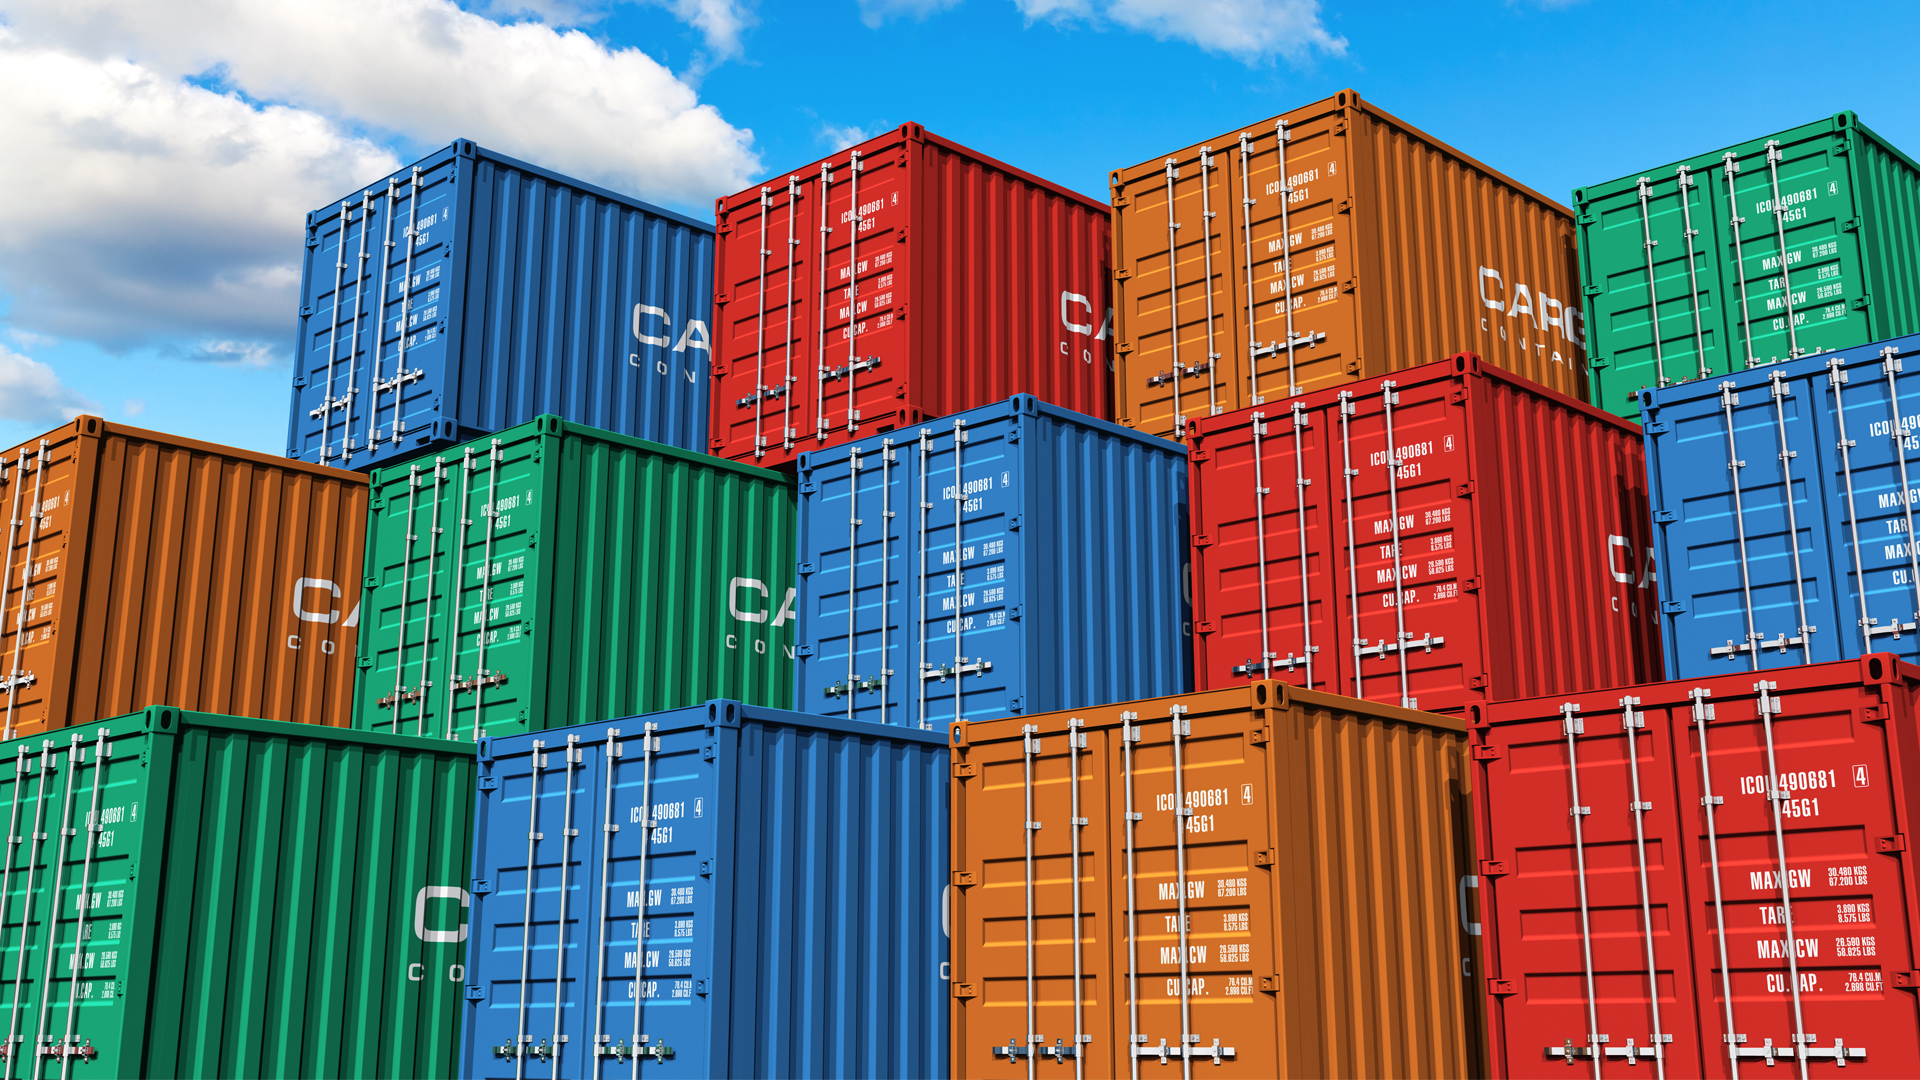 Stacked cargo containers in port Image